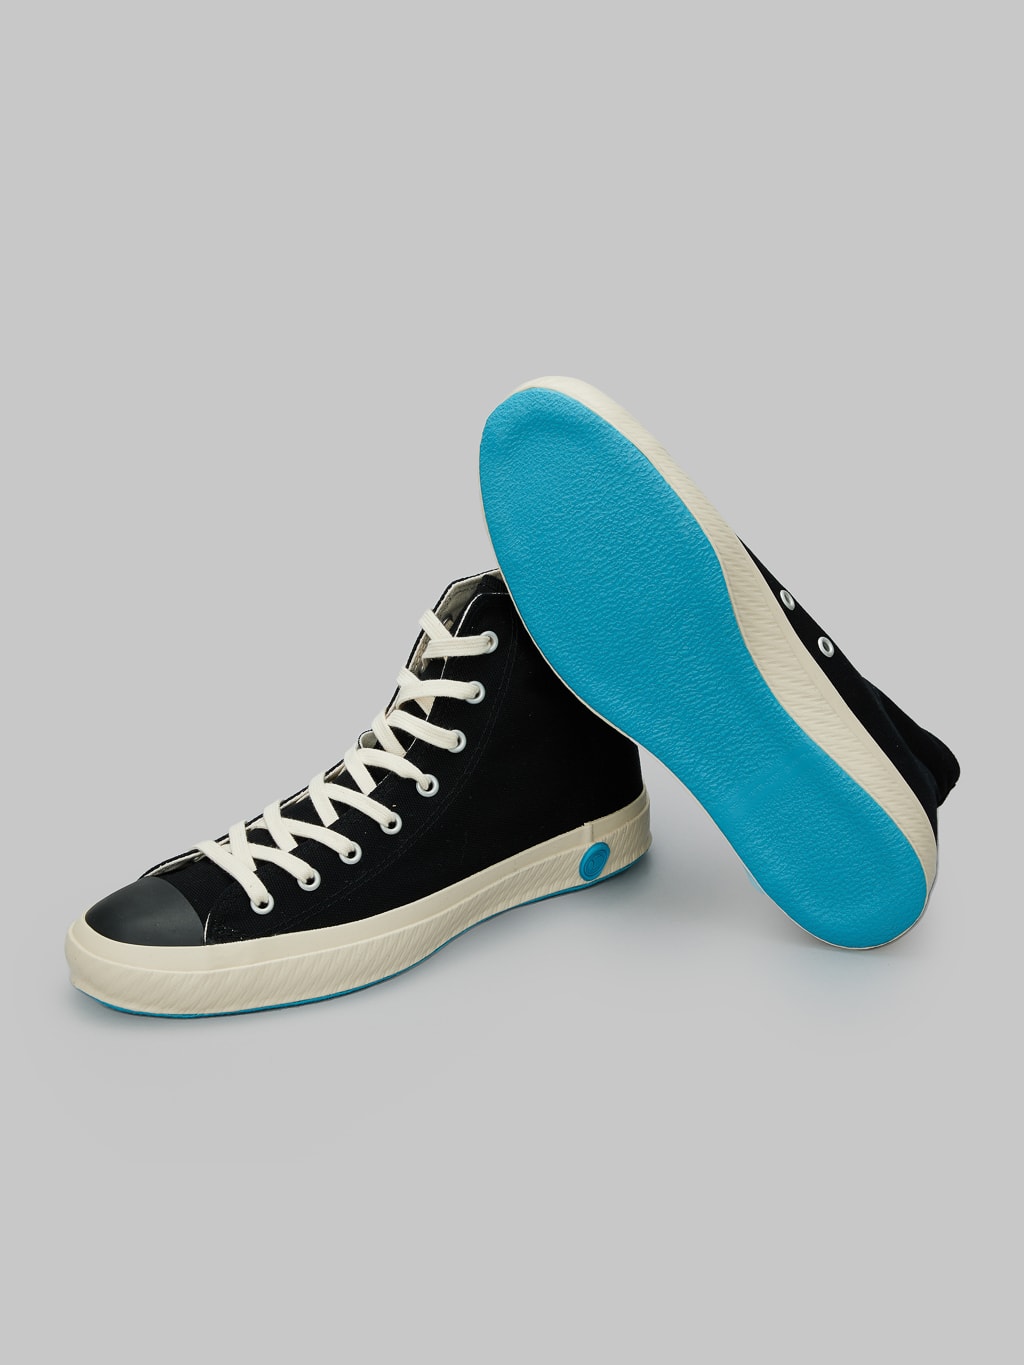 Shoes like pottery high sneaker black rubber sole